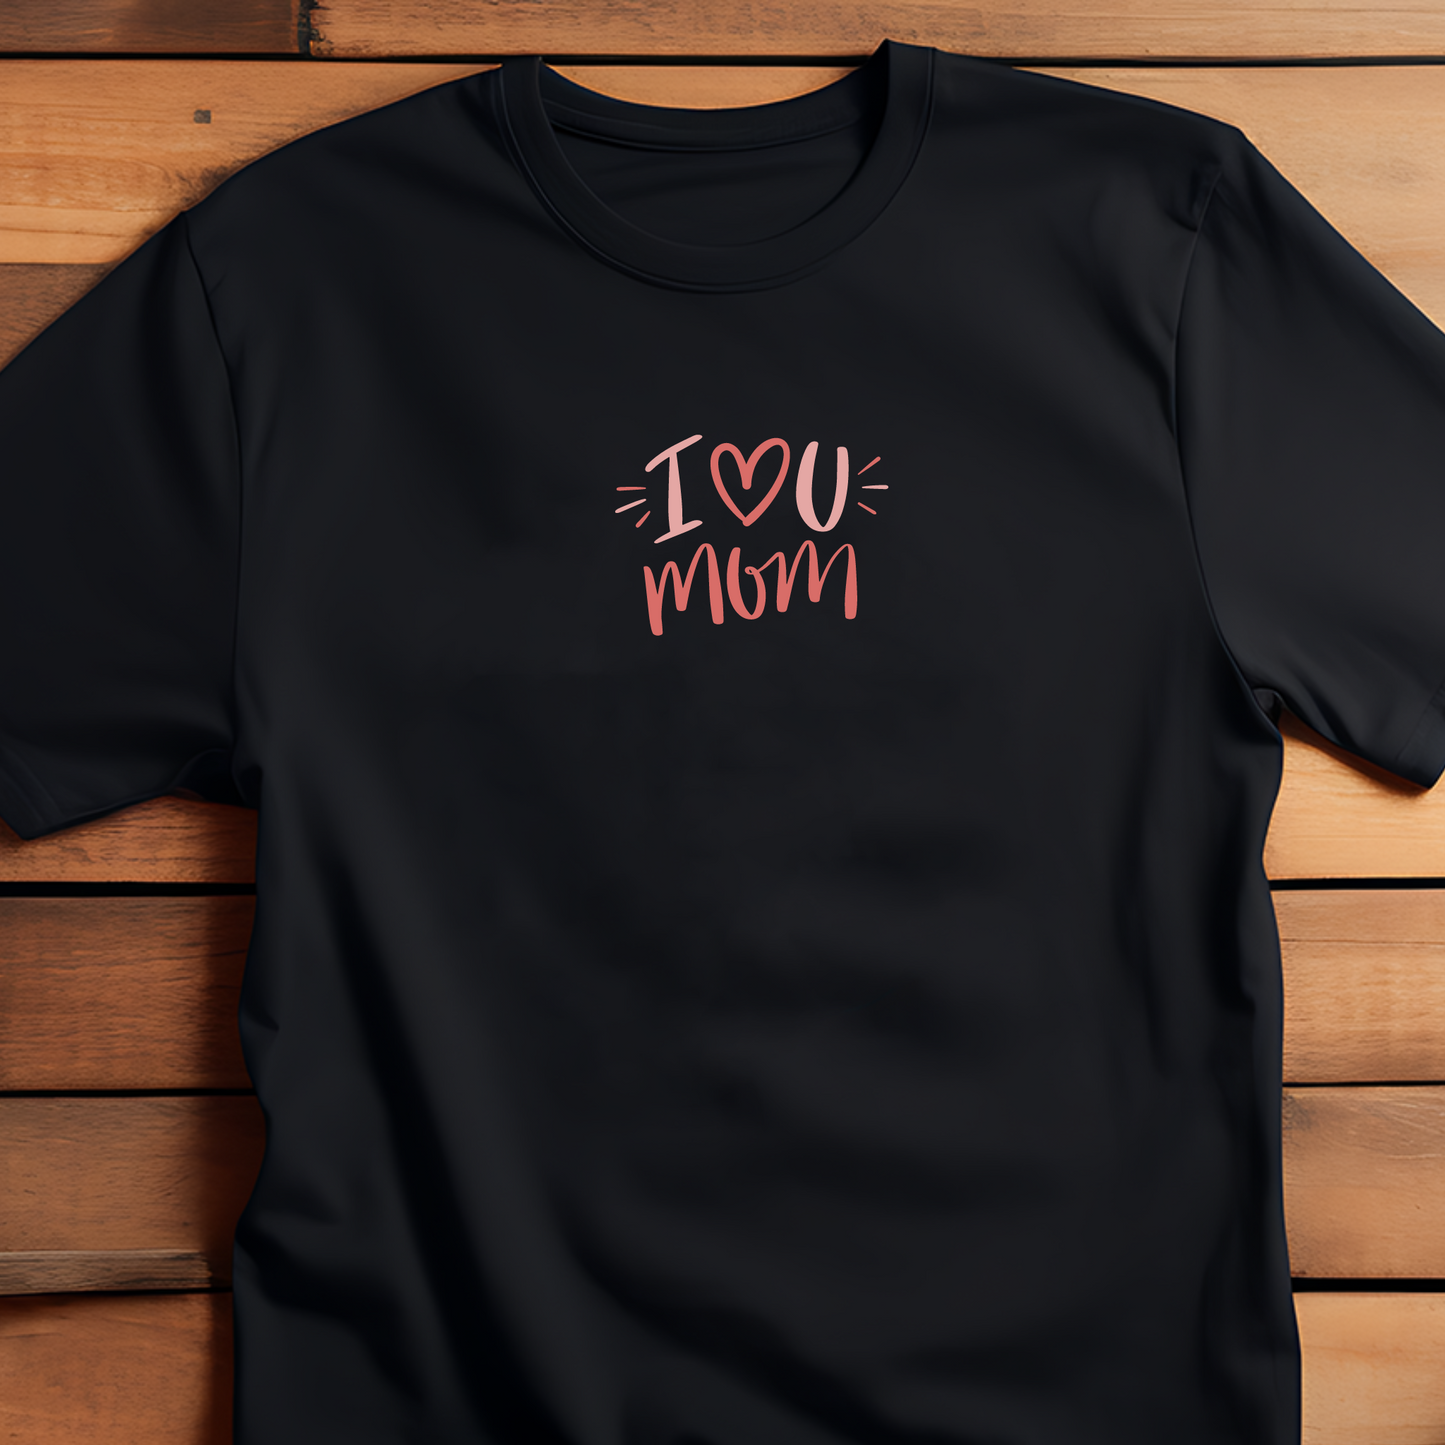 (shirt not included) I love you Mom (4 inch) Pocket - Matte Clear Film Transfer